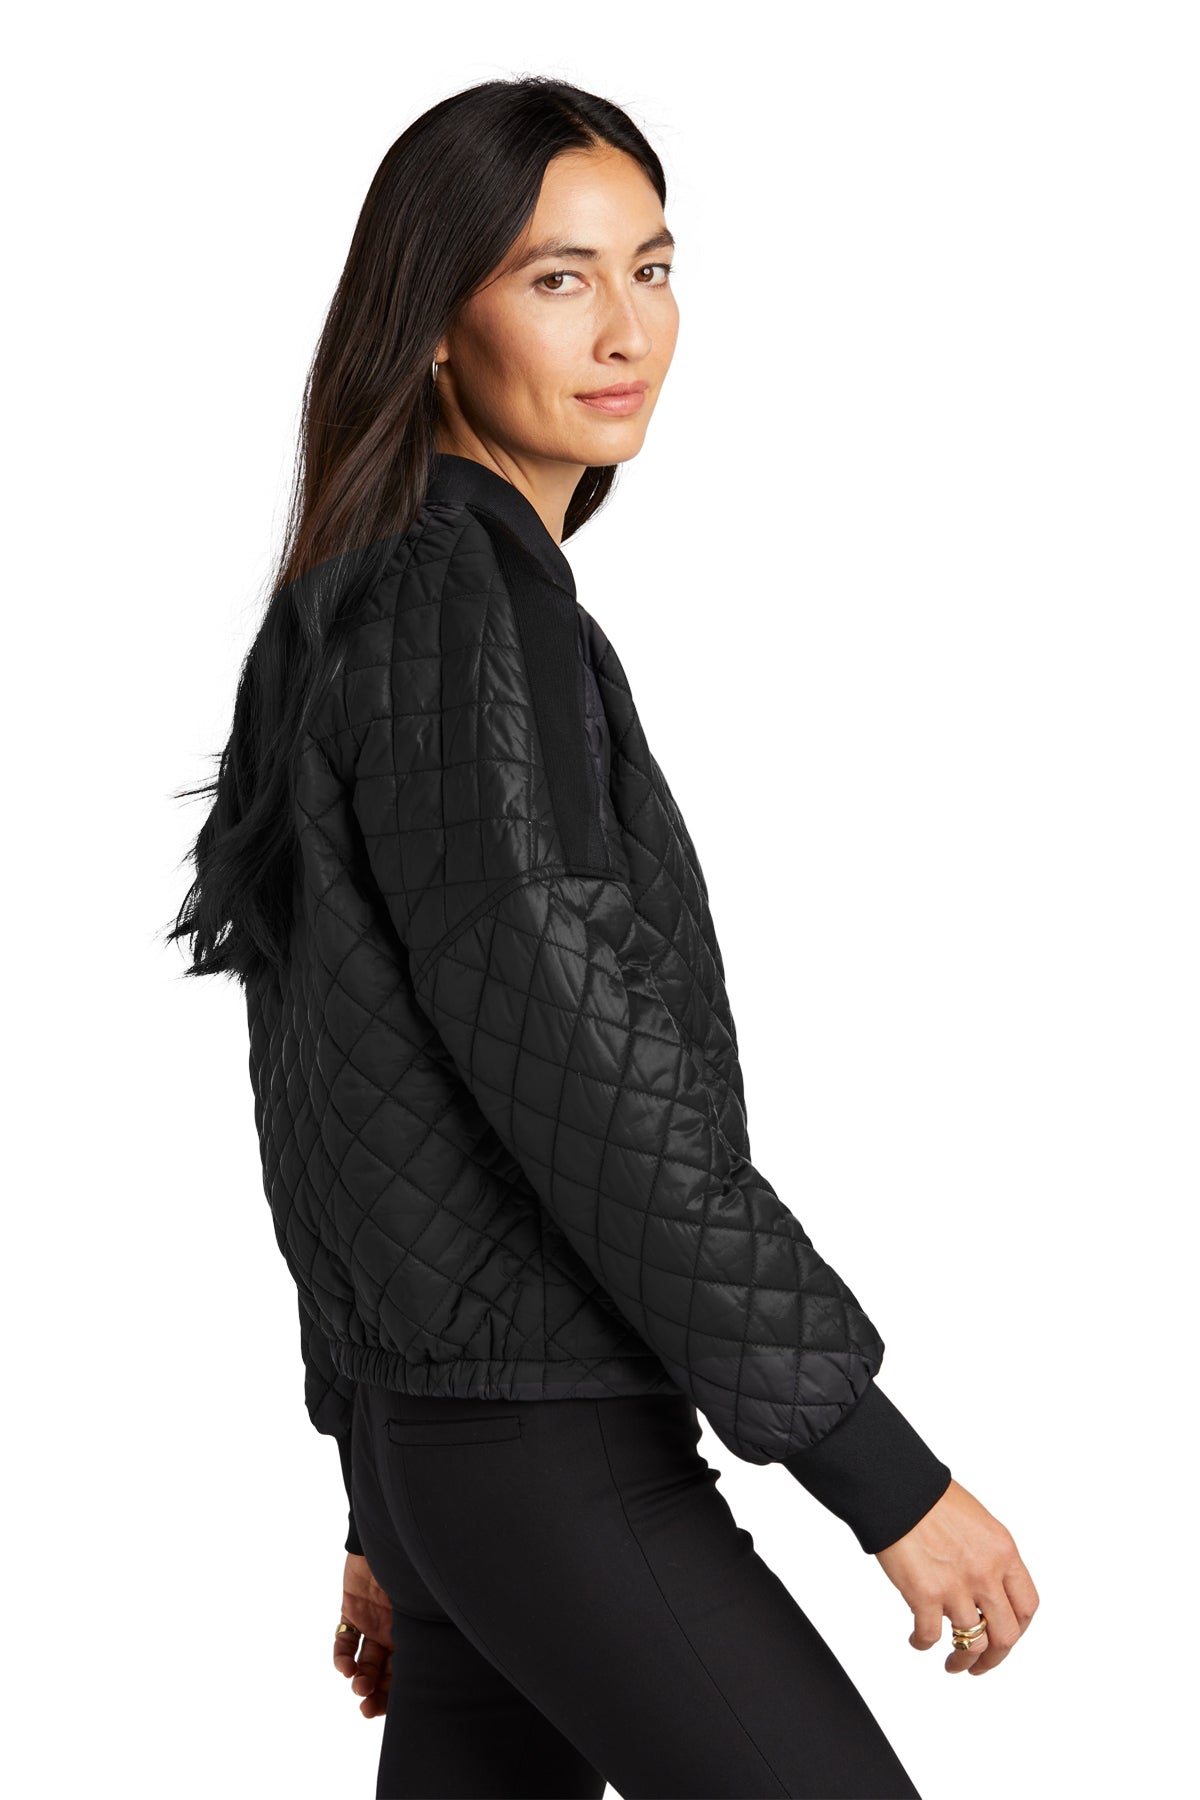 MM7201 Mercer+Mettle™ Women’s Boxy Quilted Jacket